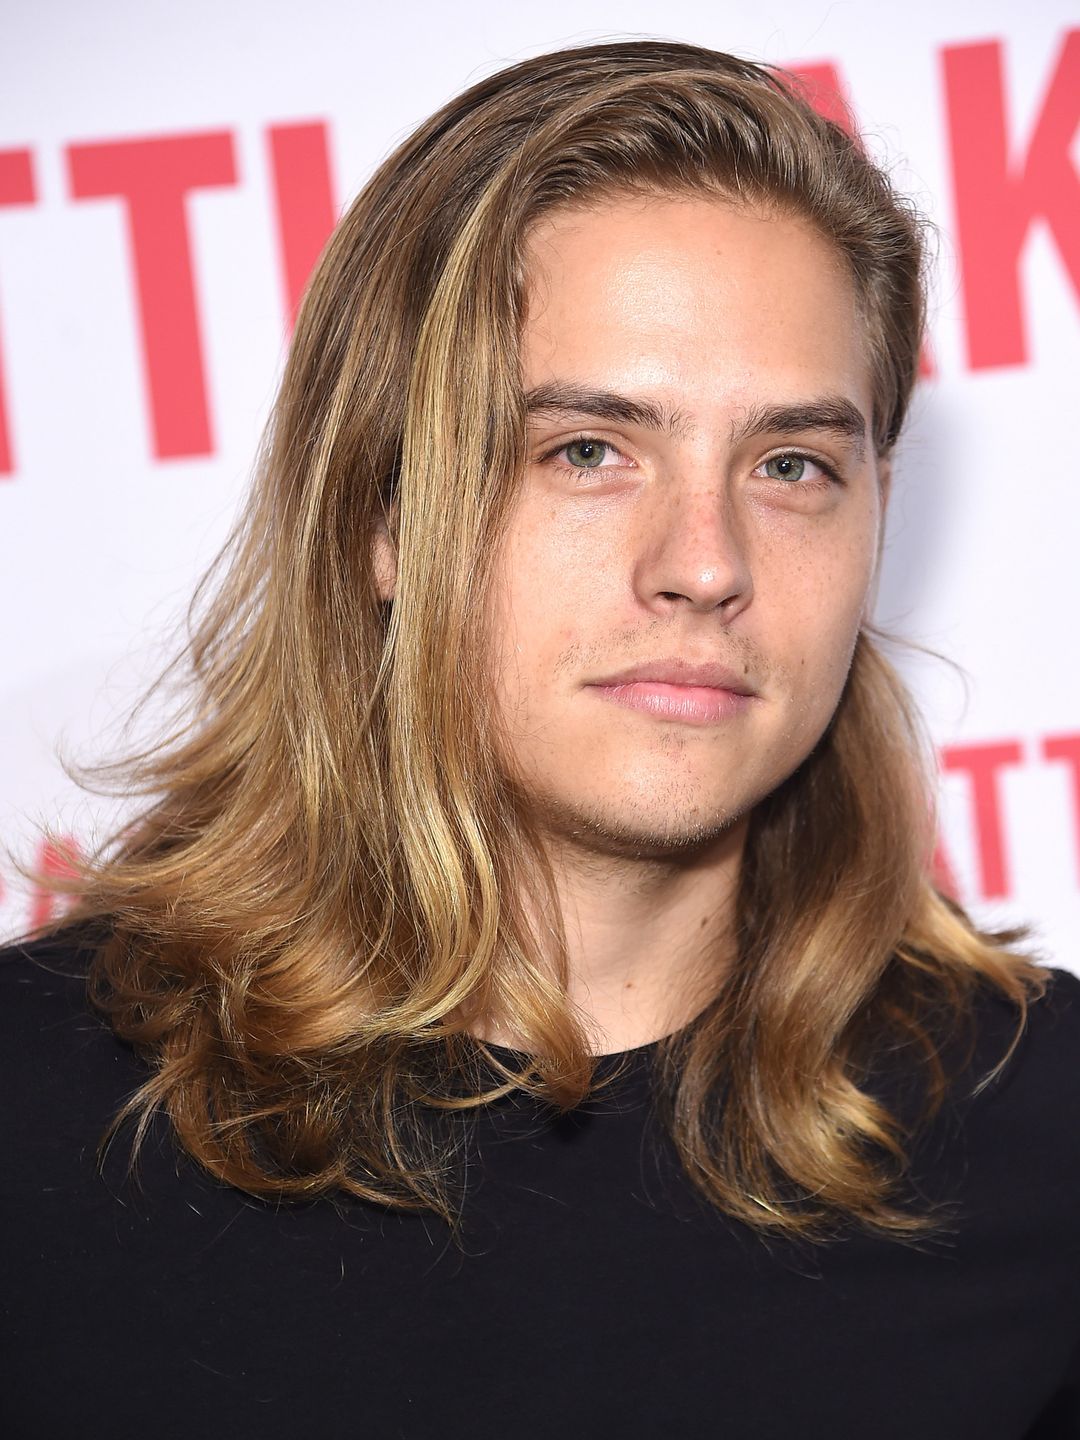 Dylan Sprouse childhood